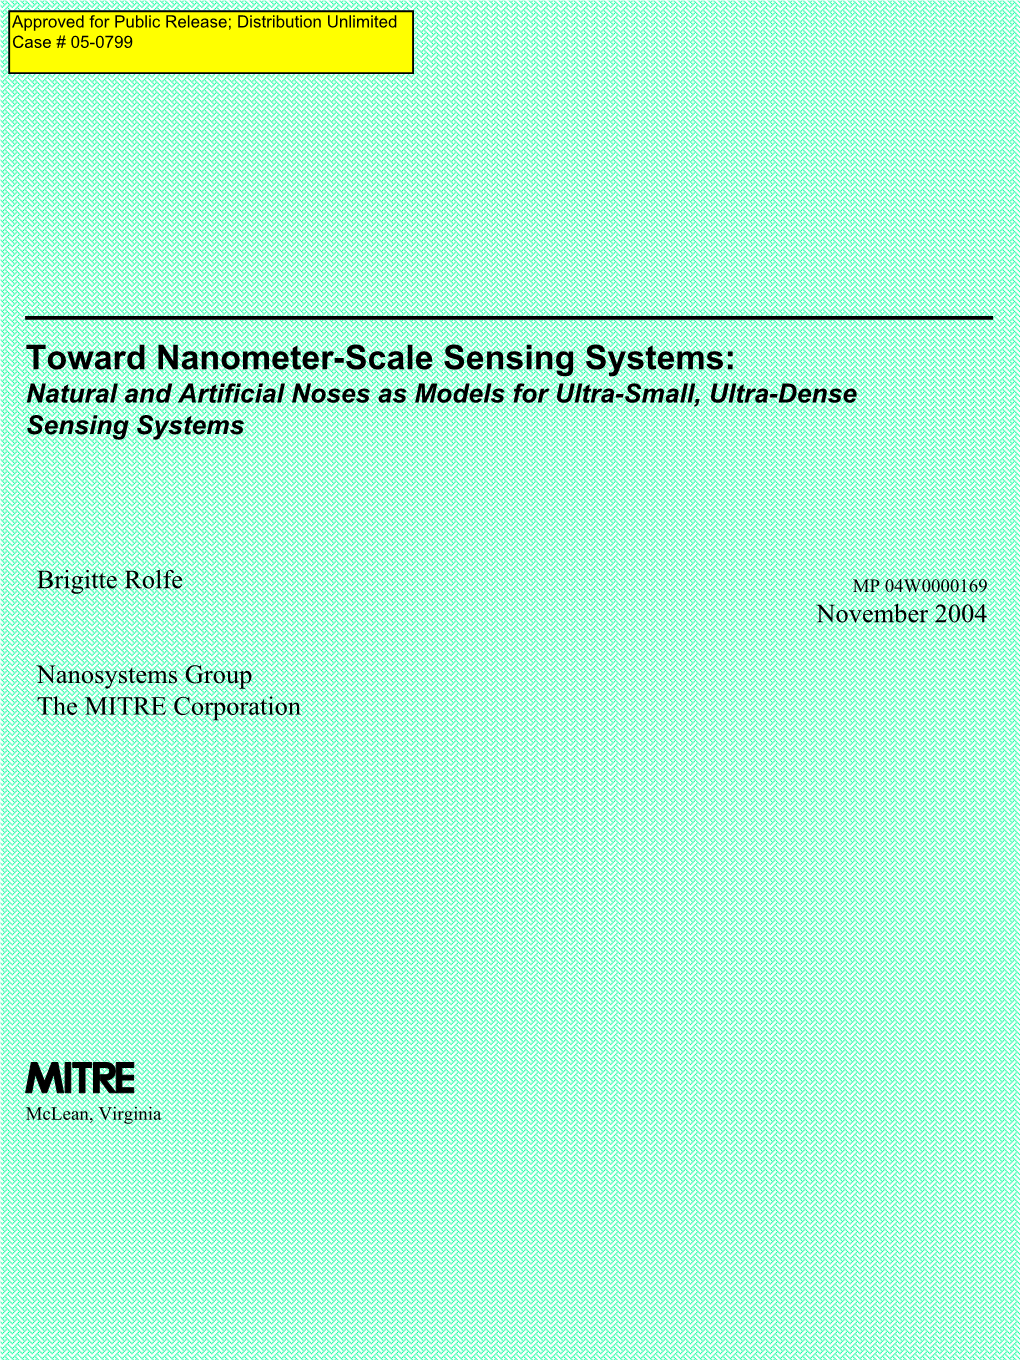 Natural and Artificial Noses As Models for Ultra-Small, Ultra-Dense Sensing Systems